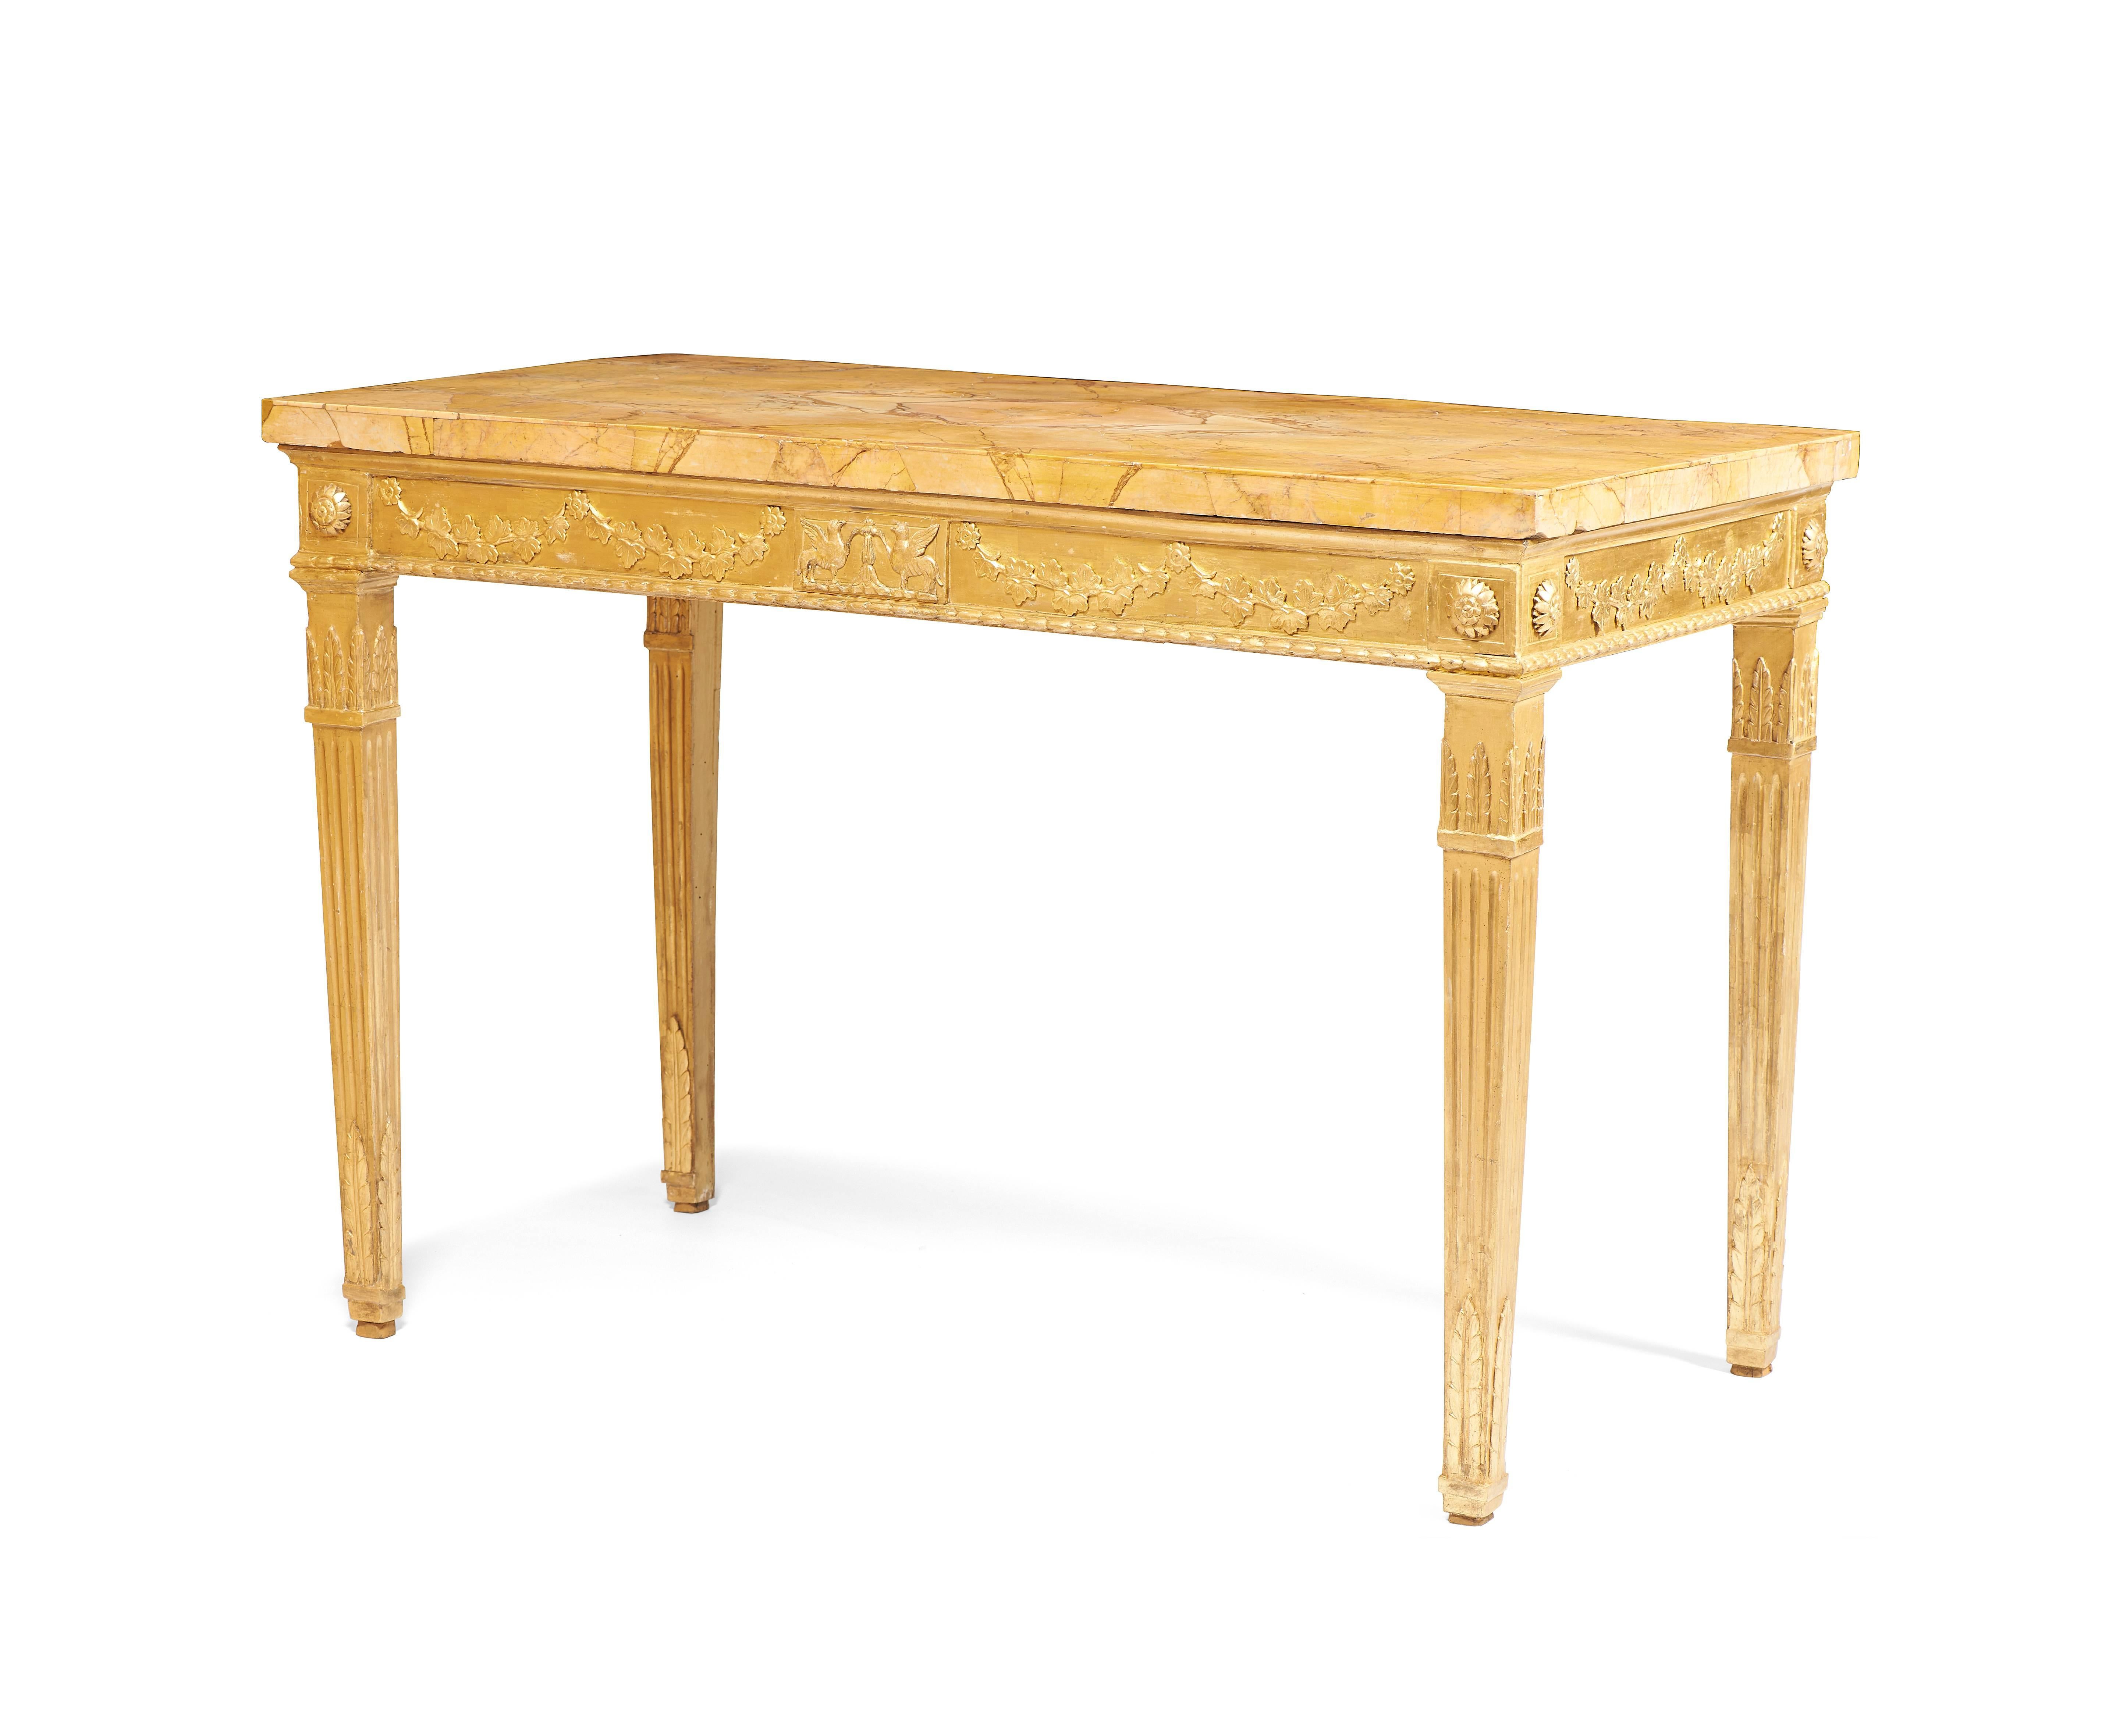 Pair of Roman giltwood console tables decorated with neoclassical and floral motifs. Louis XVI period. Marble top is from the period.